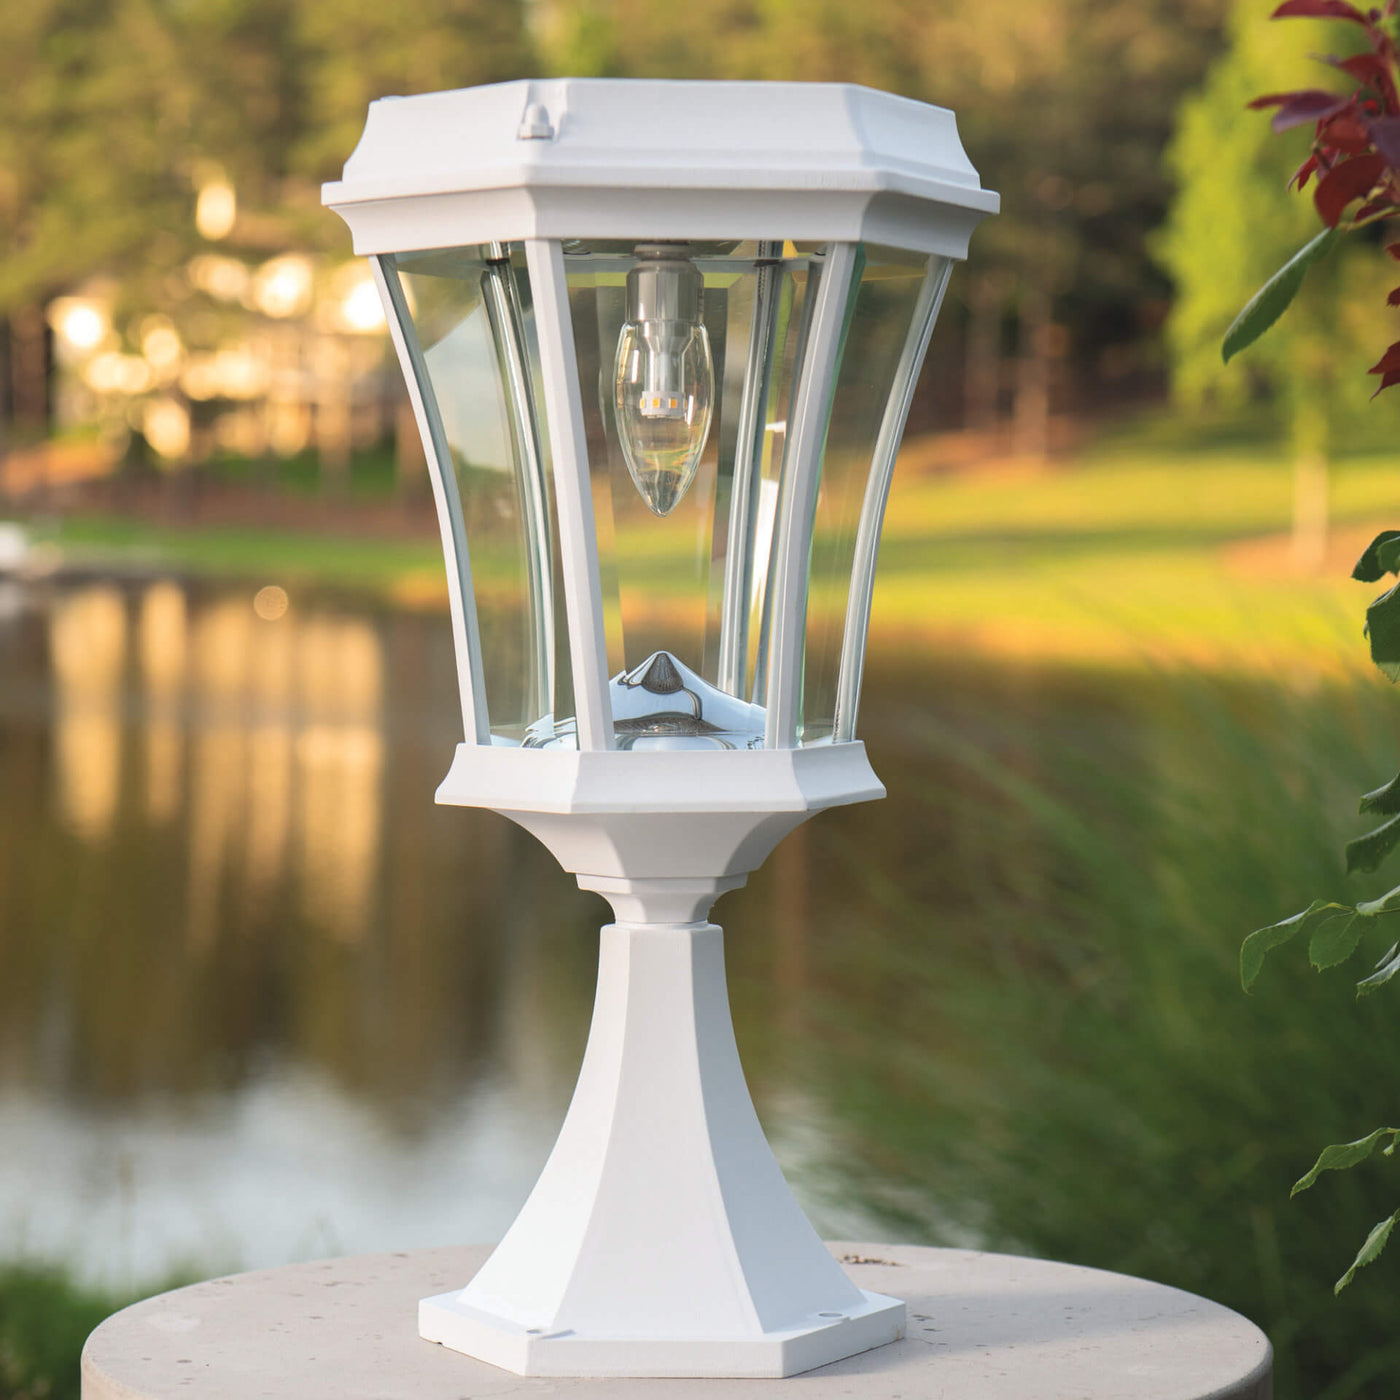 Victorian LED Solar Post Light, 150 Lumens, CCT Selectable 2700K, White or Black Finish, 3 Mounting Options Included